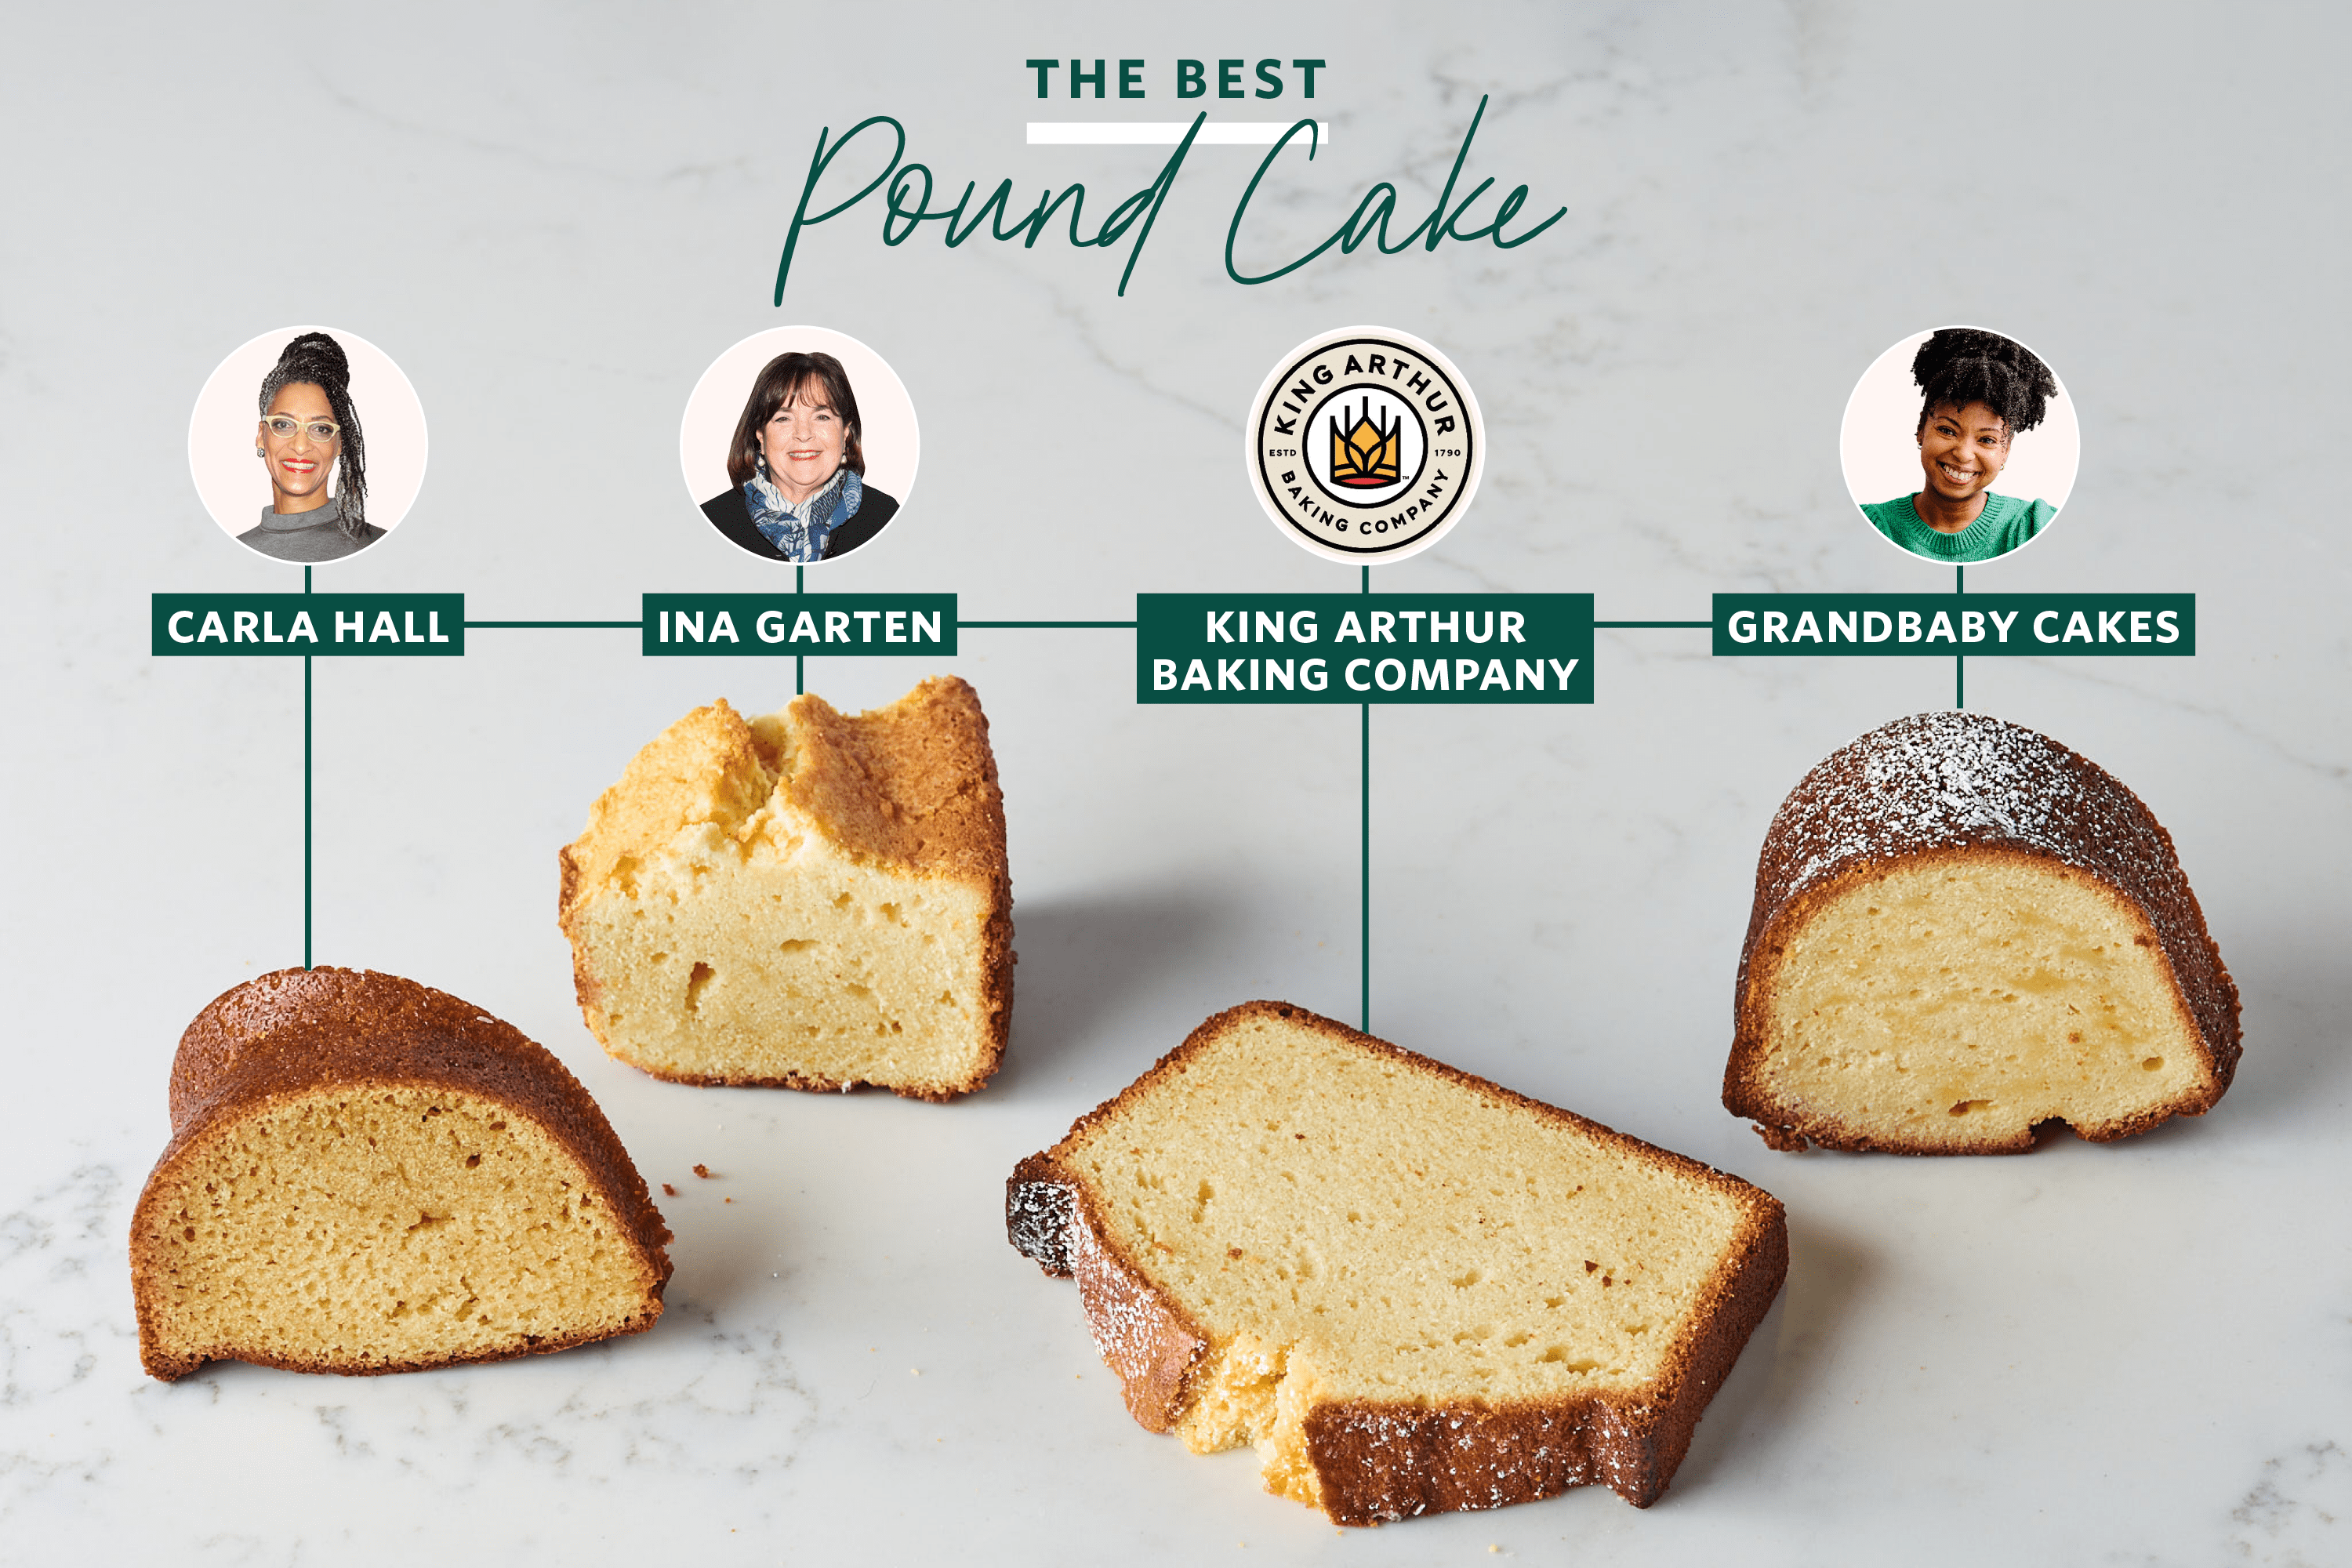 The Best Way To Make Pound Cake from Scratch